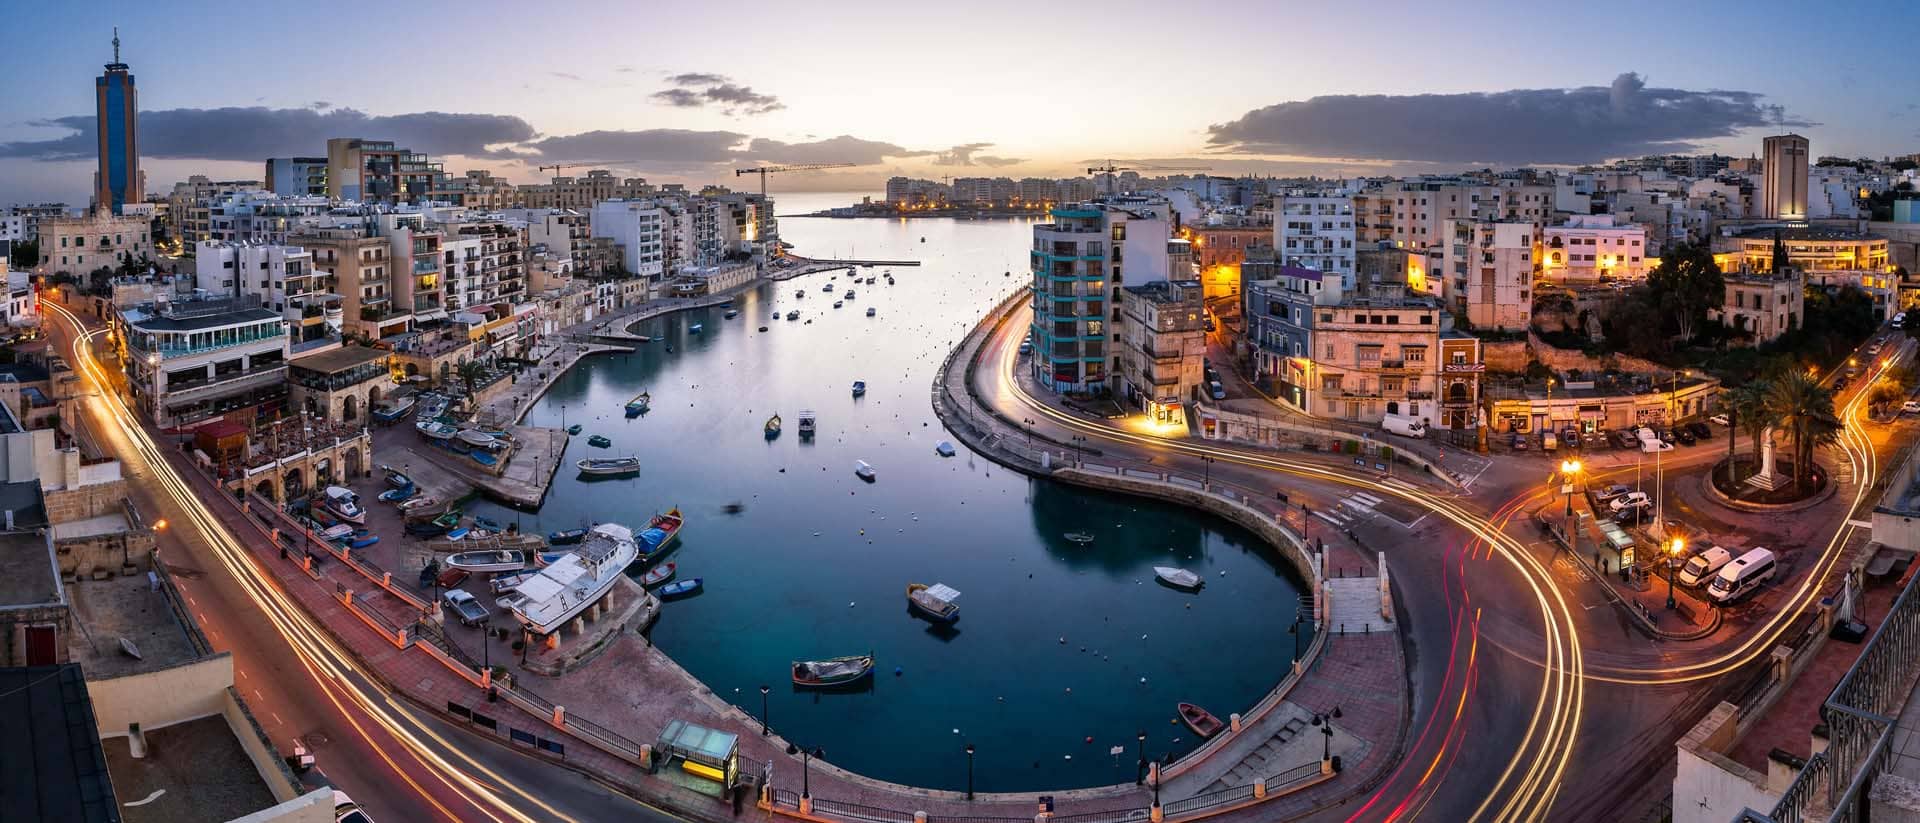 The Maltese economy is growing at a significant rate per year